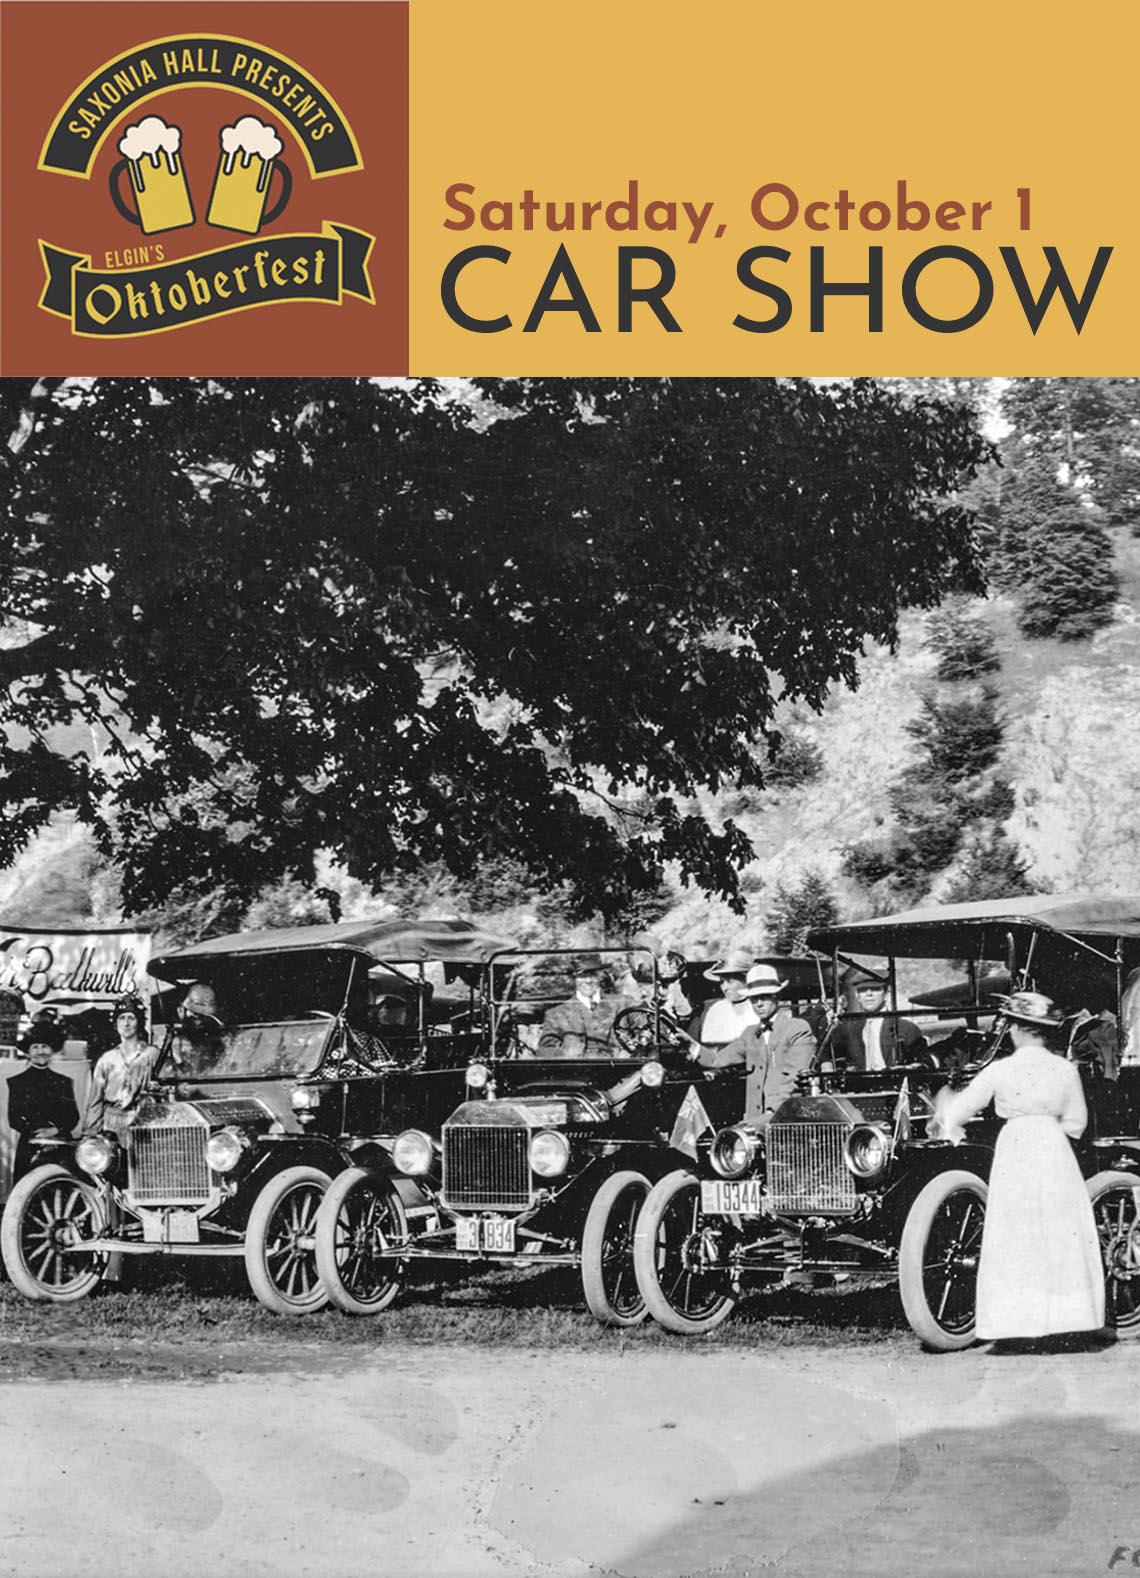 Graphic reads "Saturday, October 1 CAR SHOW" and "SAXONIA HALL PRESENTS ELGIN'S Oktoberfest" above an image of the 1915 Ford picnic in Port Bruce, including a row of Model T vehicles. 